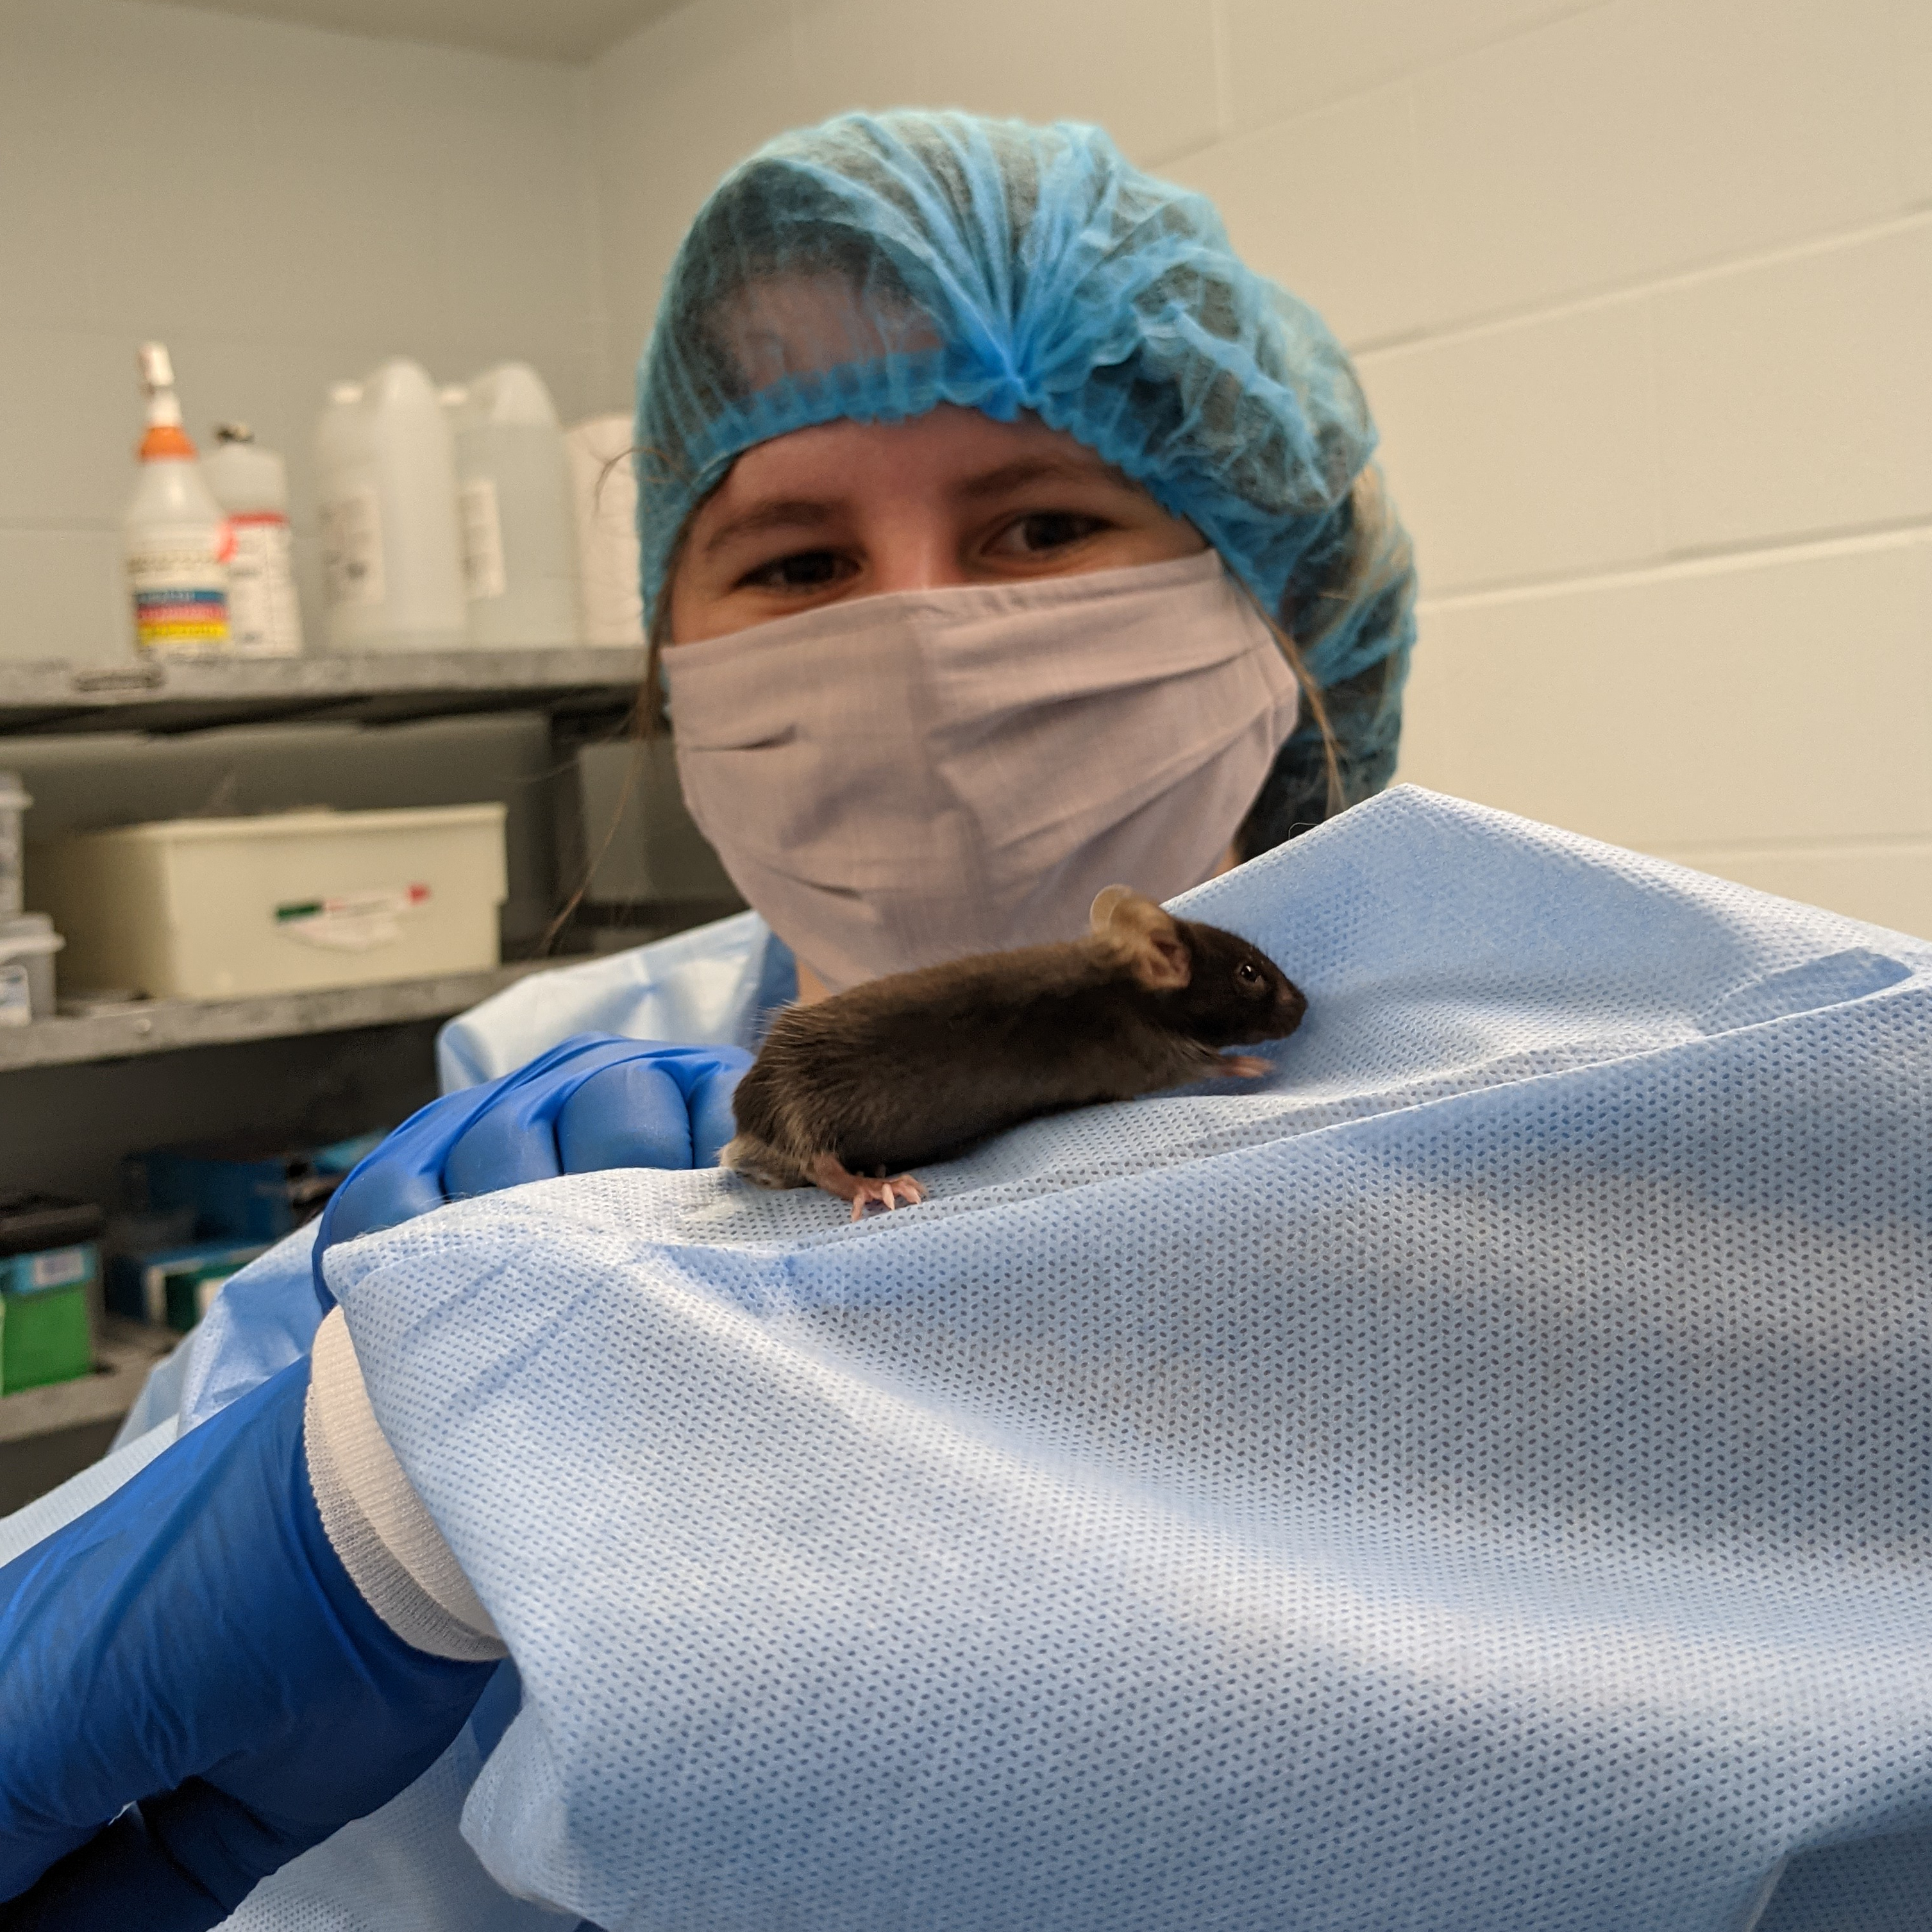 Person in a research facility holding up their arm with a mouse on it. Person is wearing a hairnet, nitrile gloves, surgical mask, and a surgical gown. They are holding their left arm up to the camera to show off a mouse with dark brown fur sitting on their arm. In the background is a metal shelf with containers of research materials.